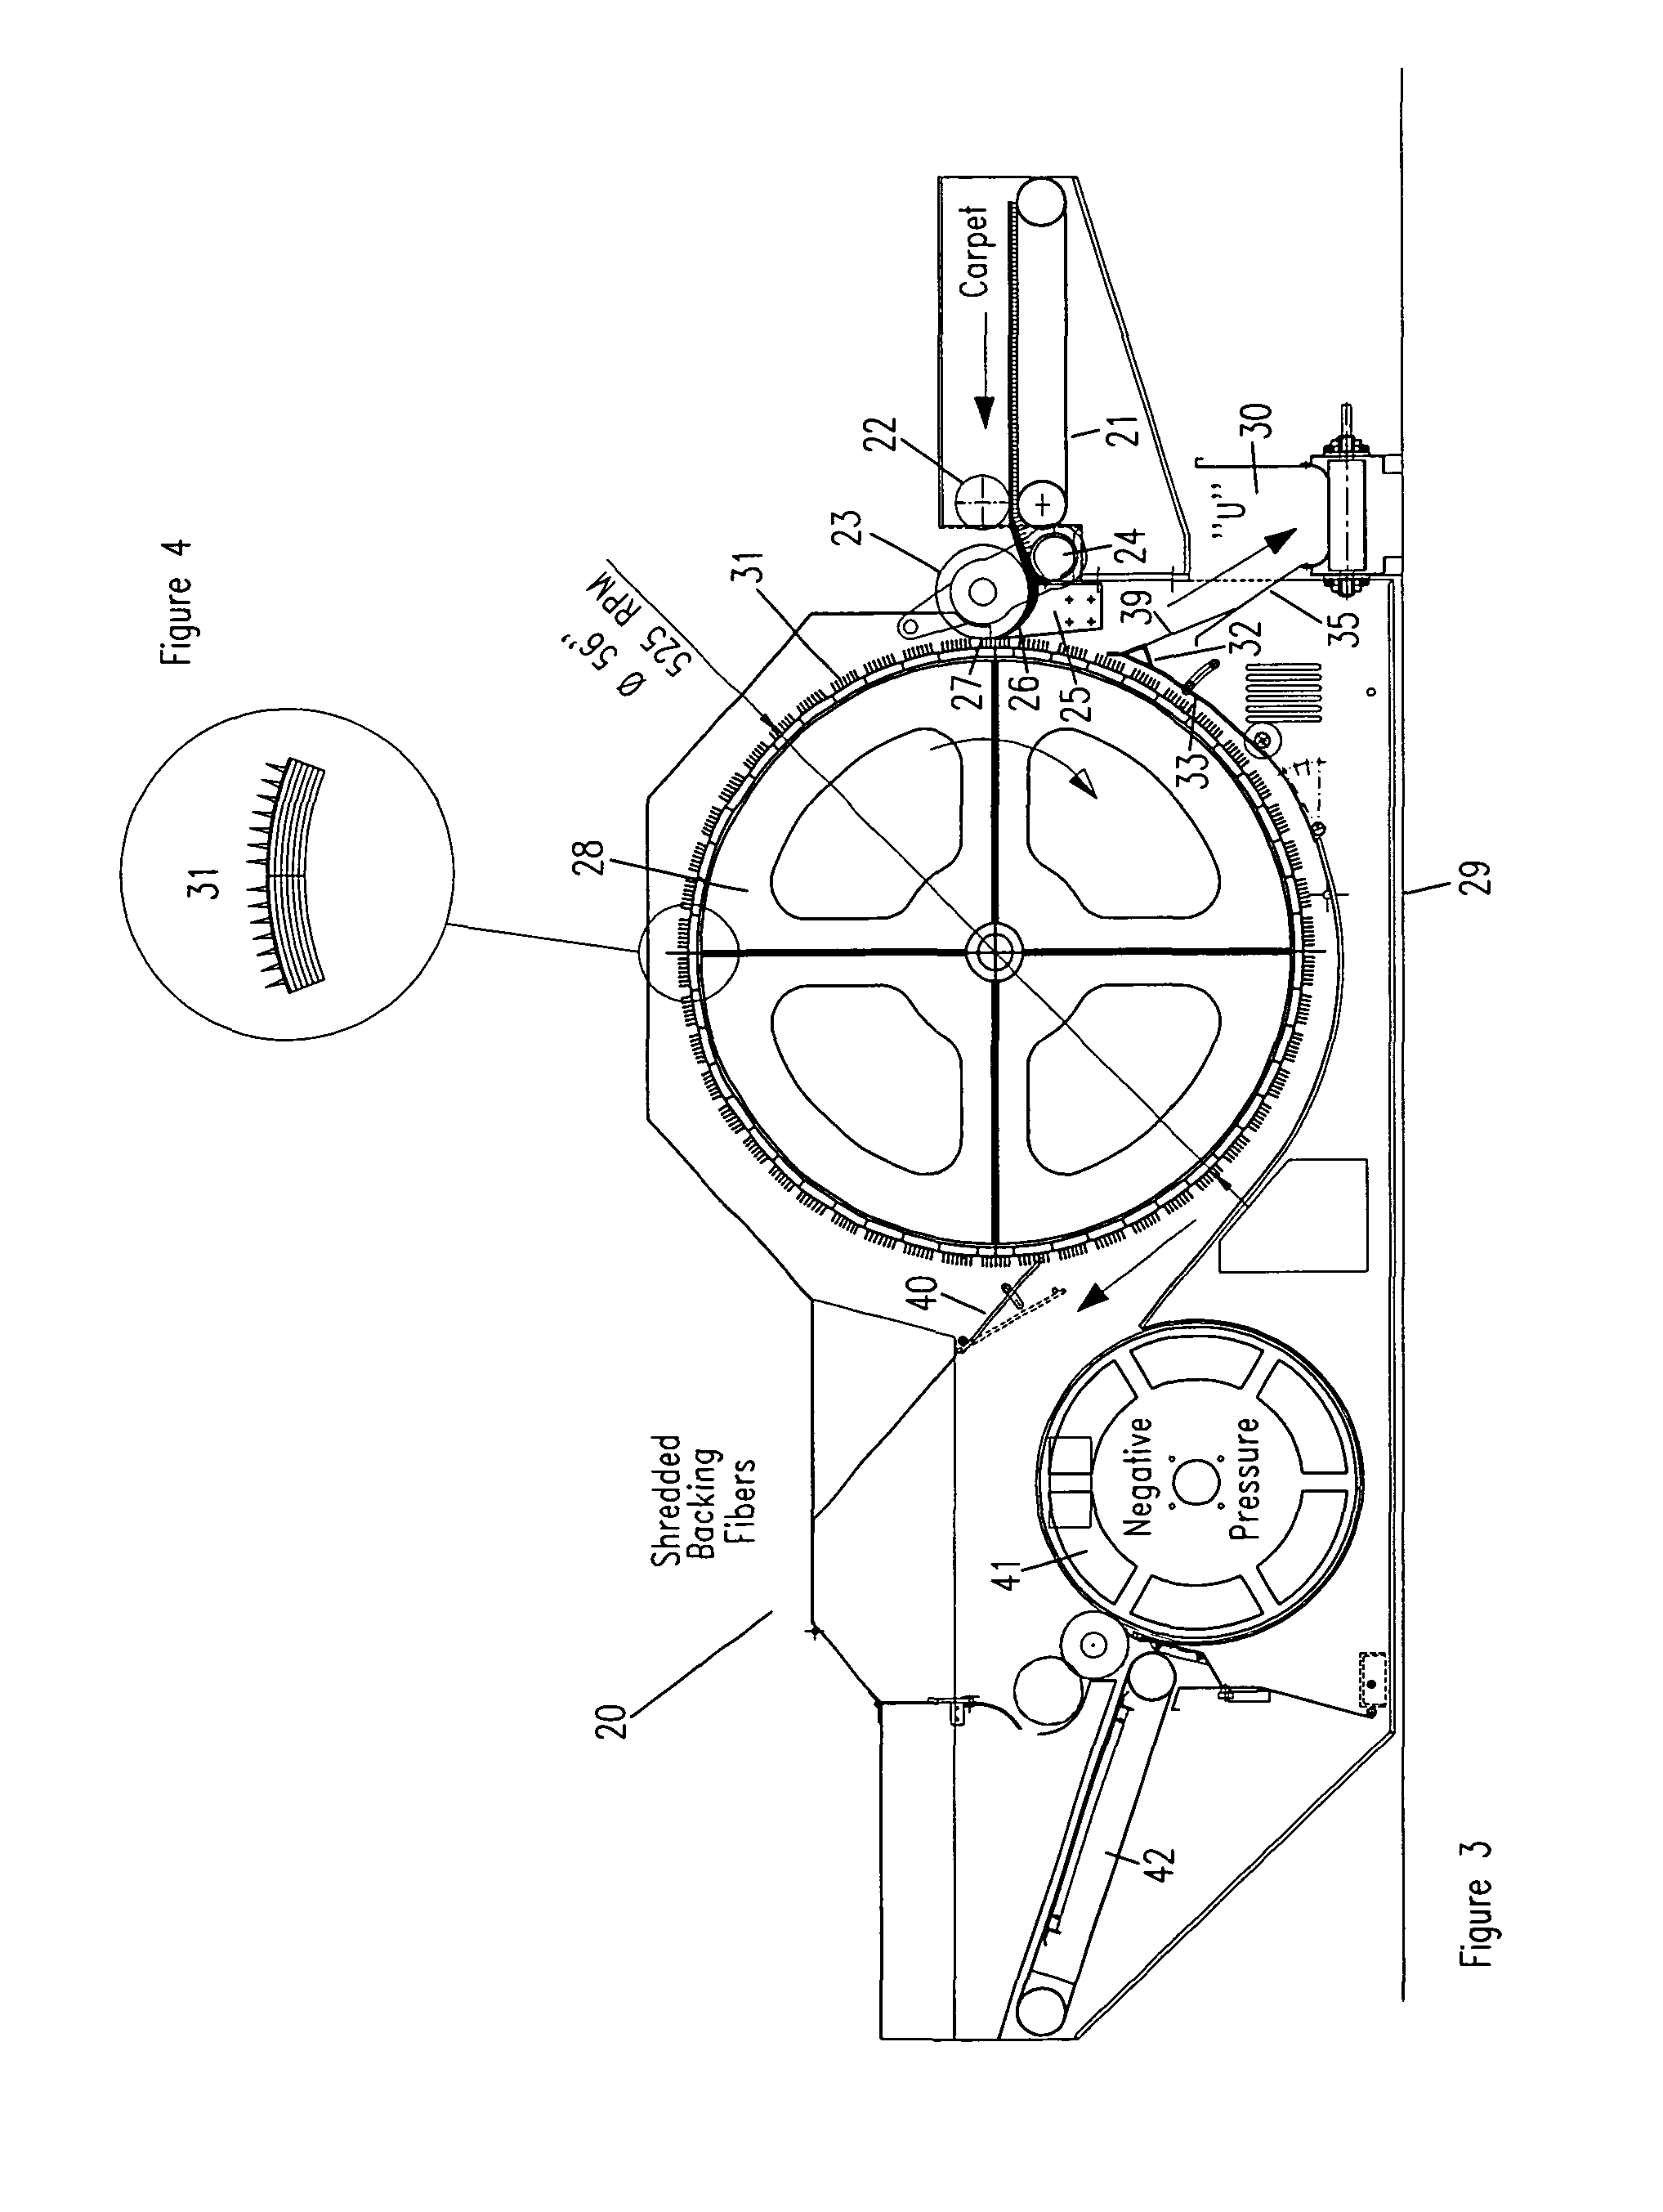 Method and apparatus for recycling carpet